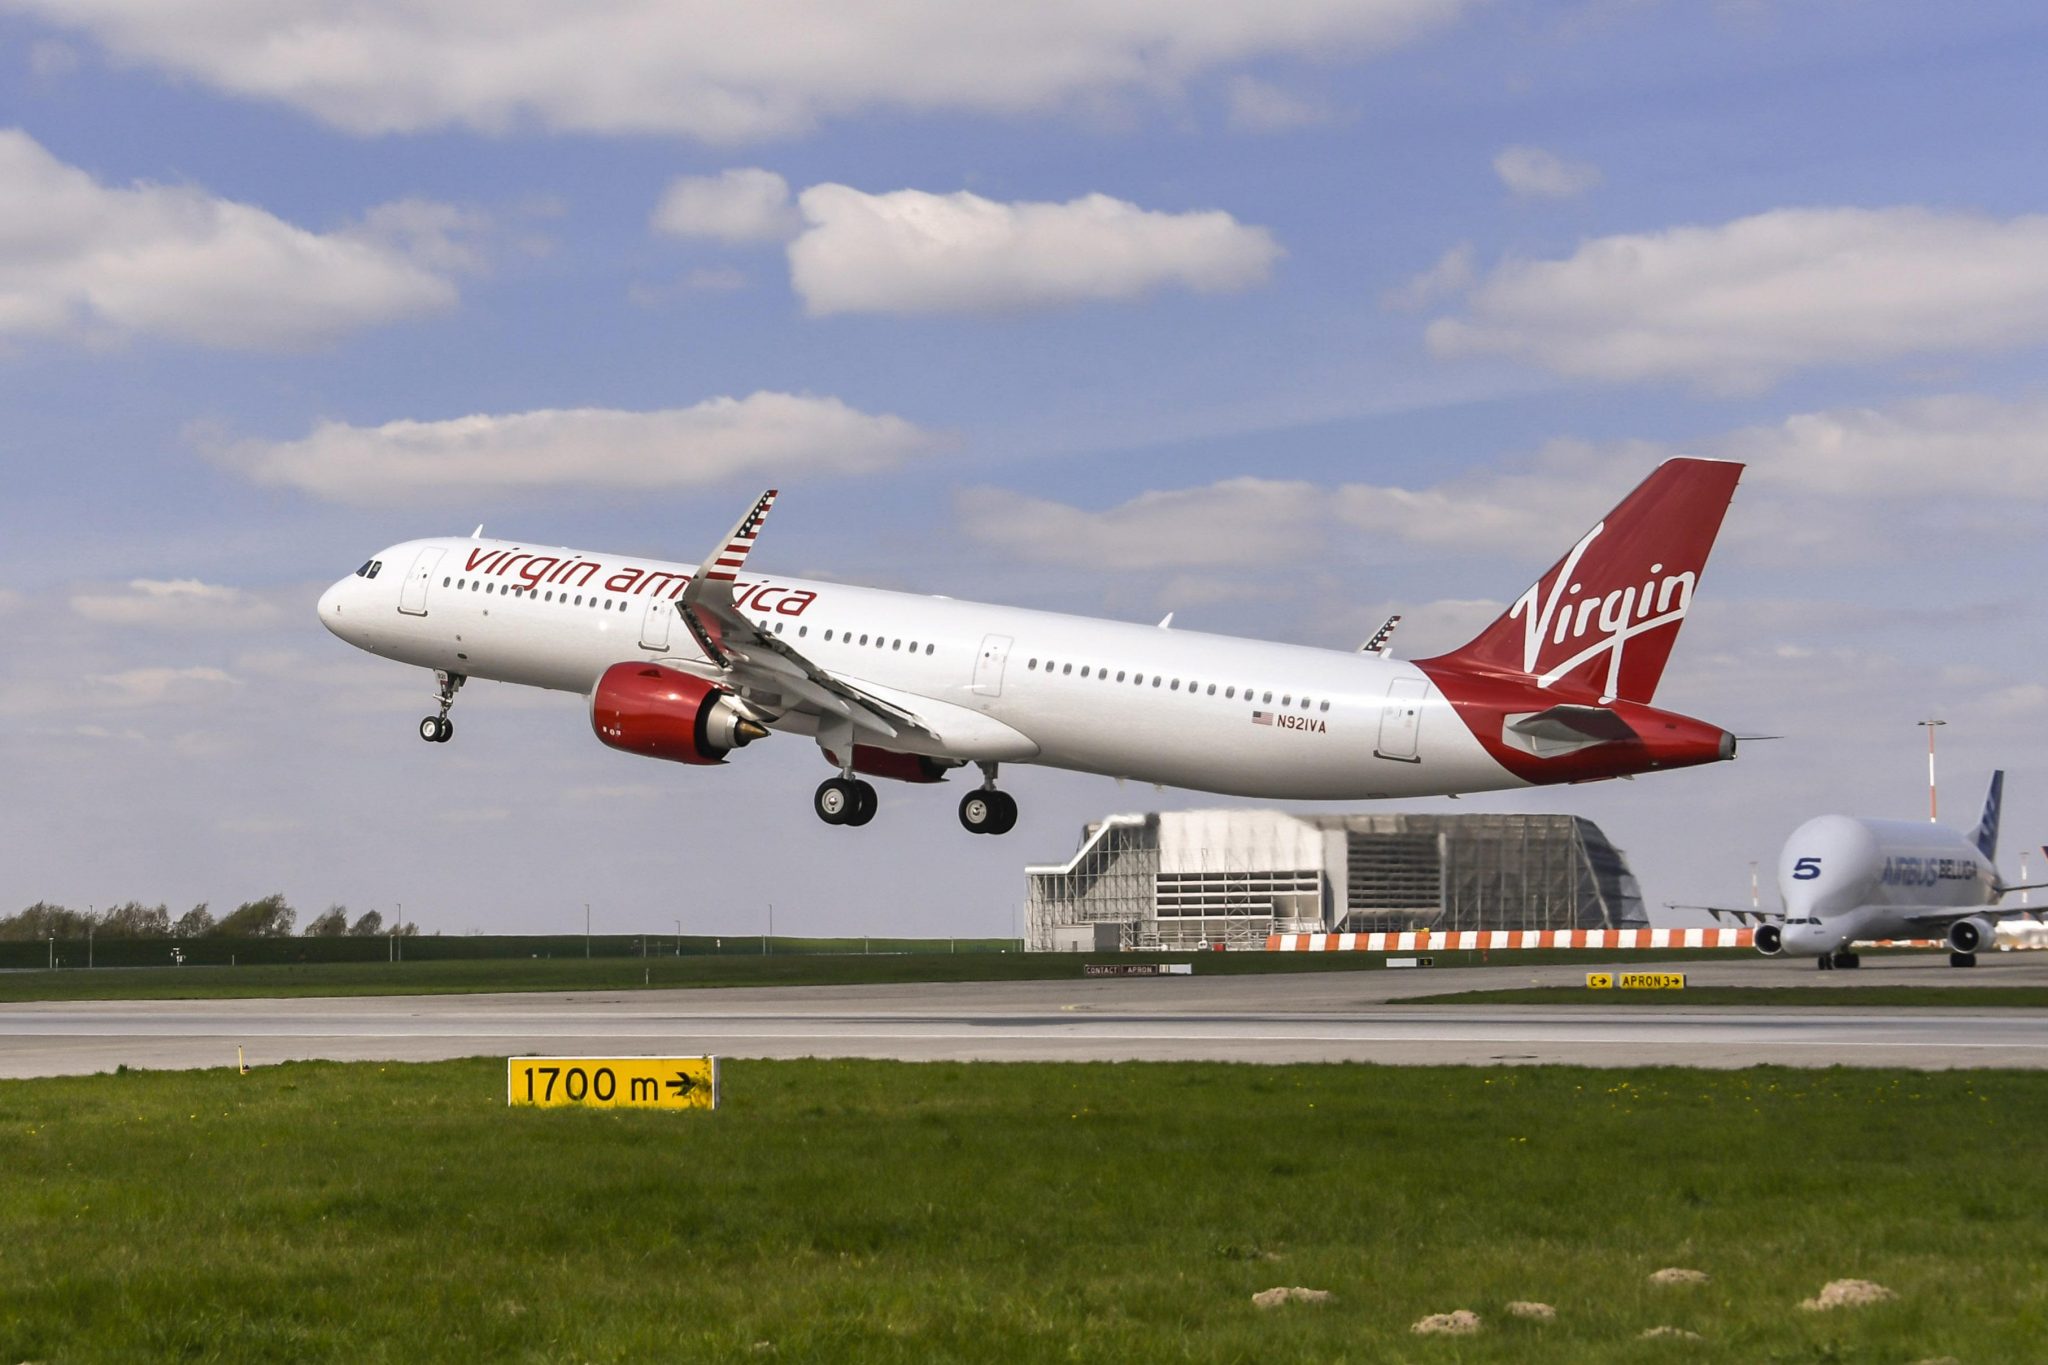 Virgin America takes delivery of its first ever A321neo